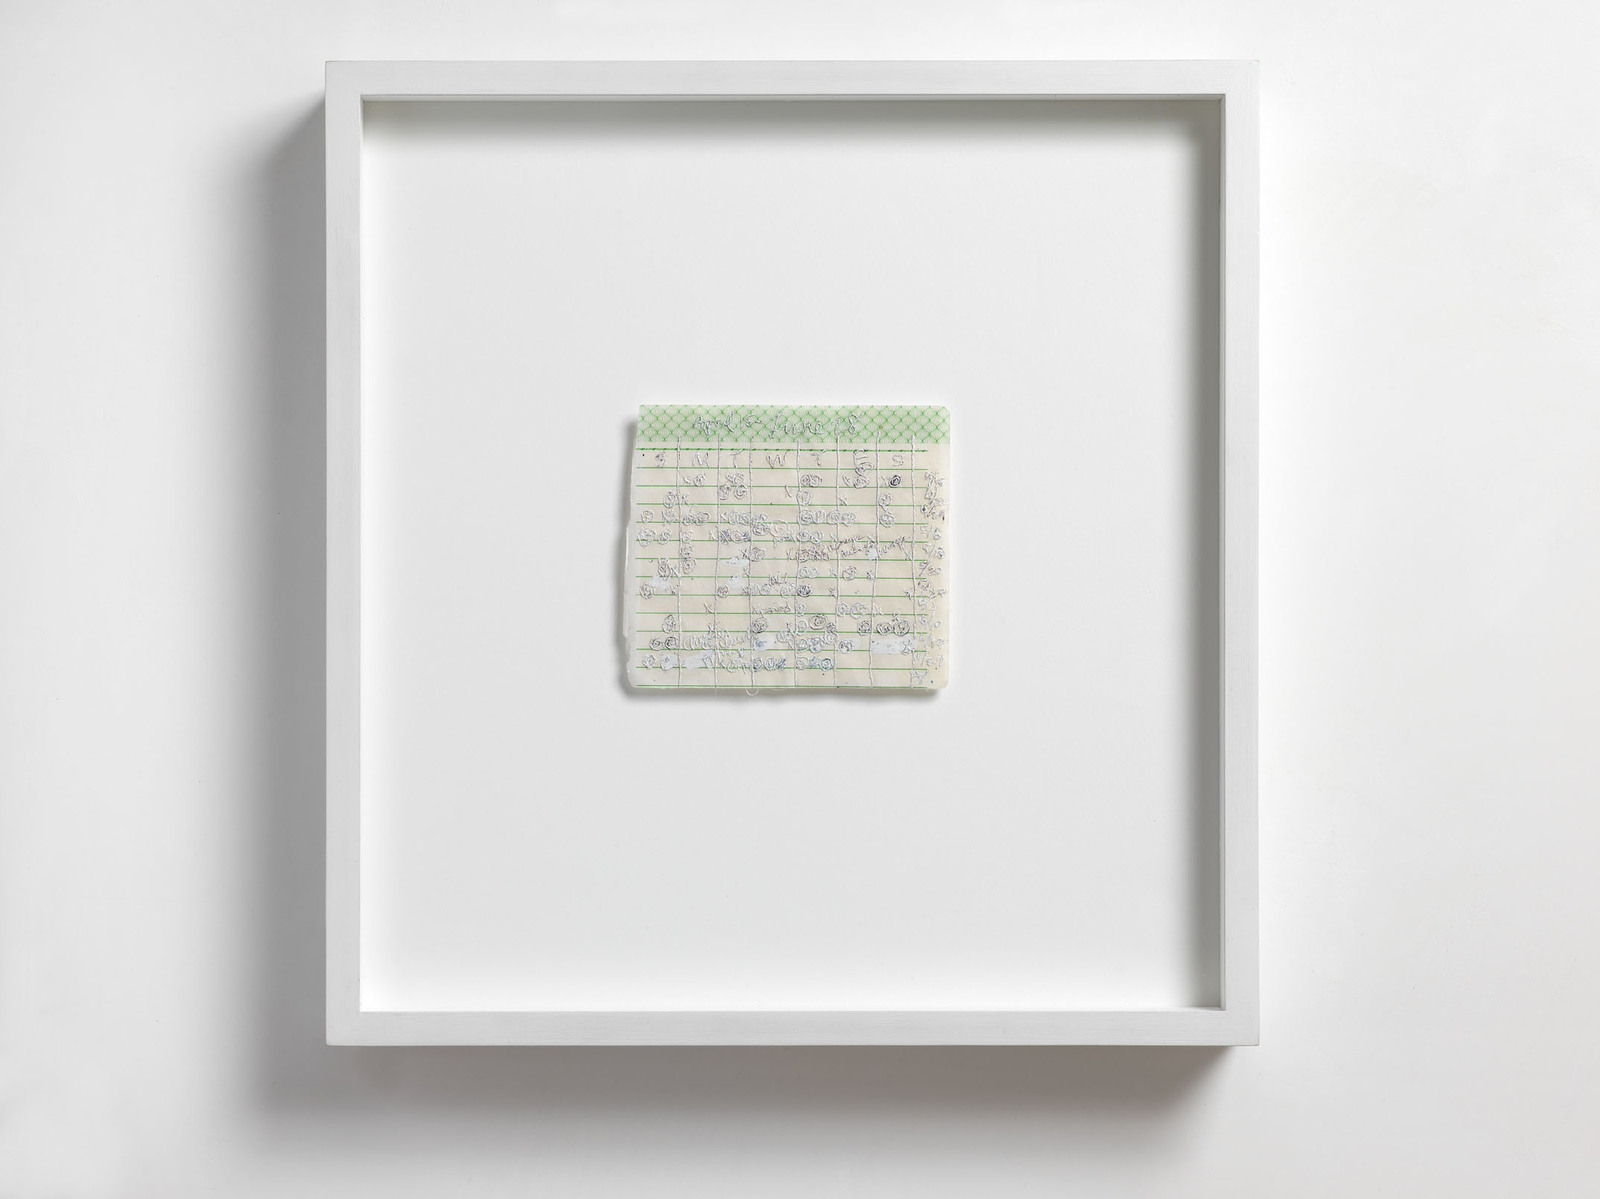 Nicola Ginzel  Archive/ Selected Flatwork  hand written schedule, embroidered with thread by hand